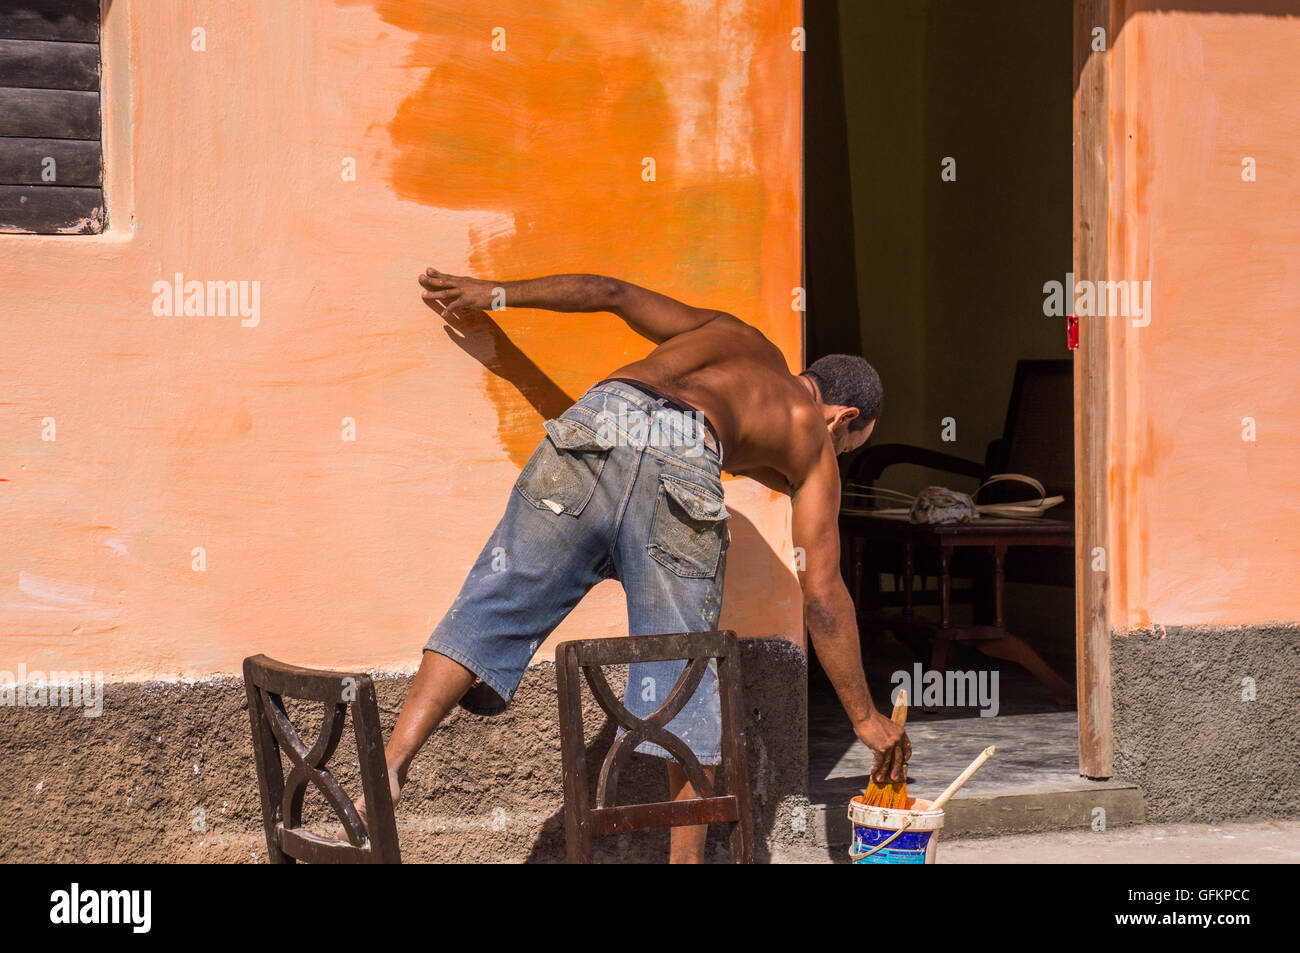 Trinidad, Cuba on December 30, 2015: A man is repainting a wall with a bright orange color. This illustrates the repainting of C Stock Photo